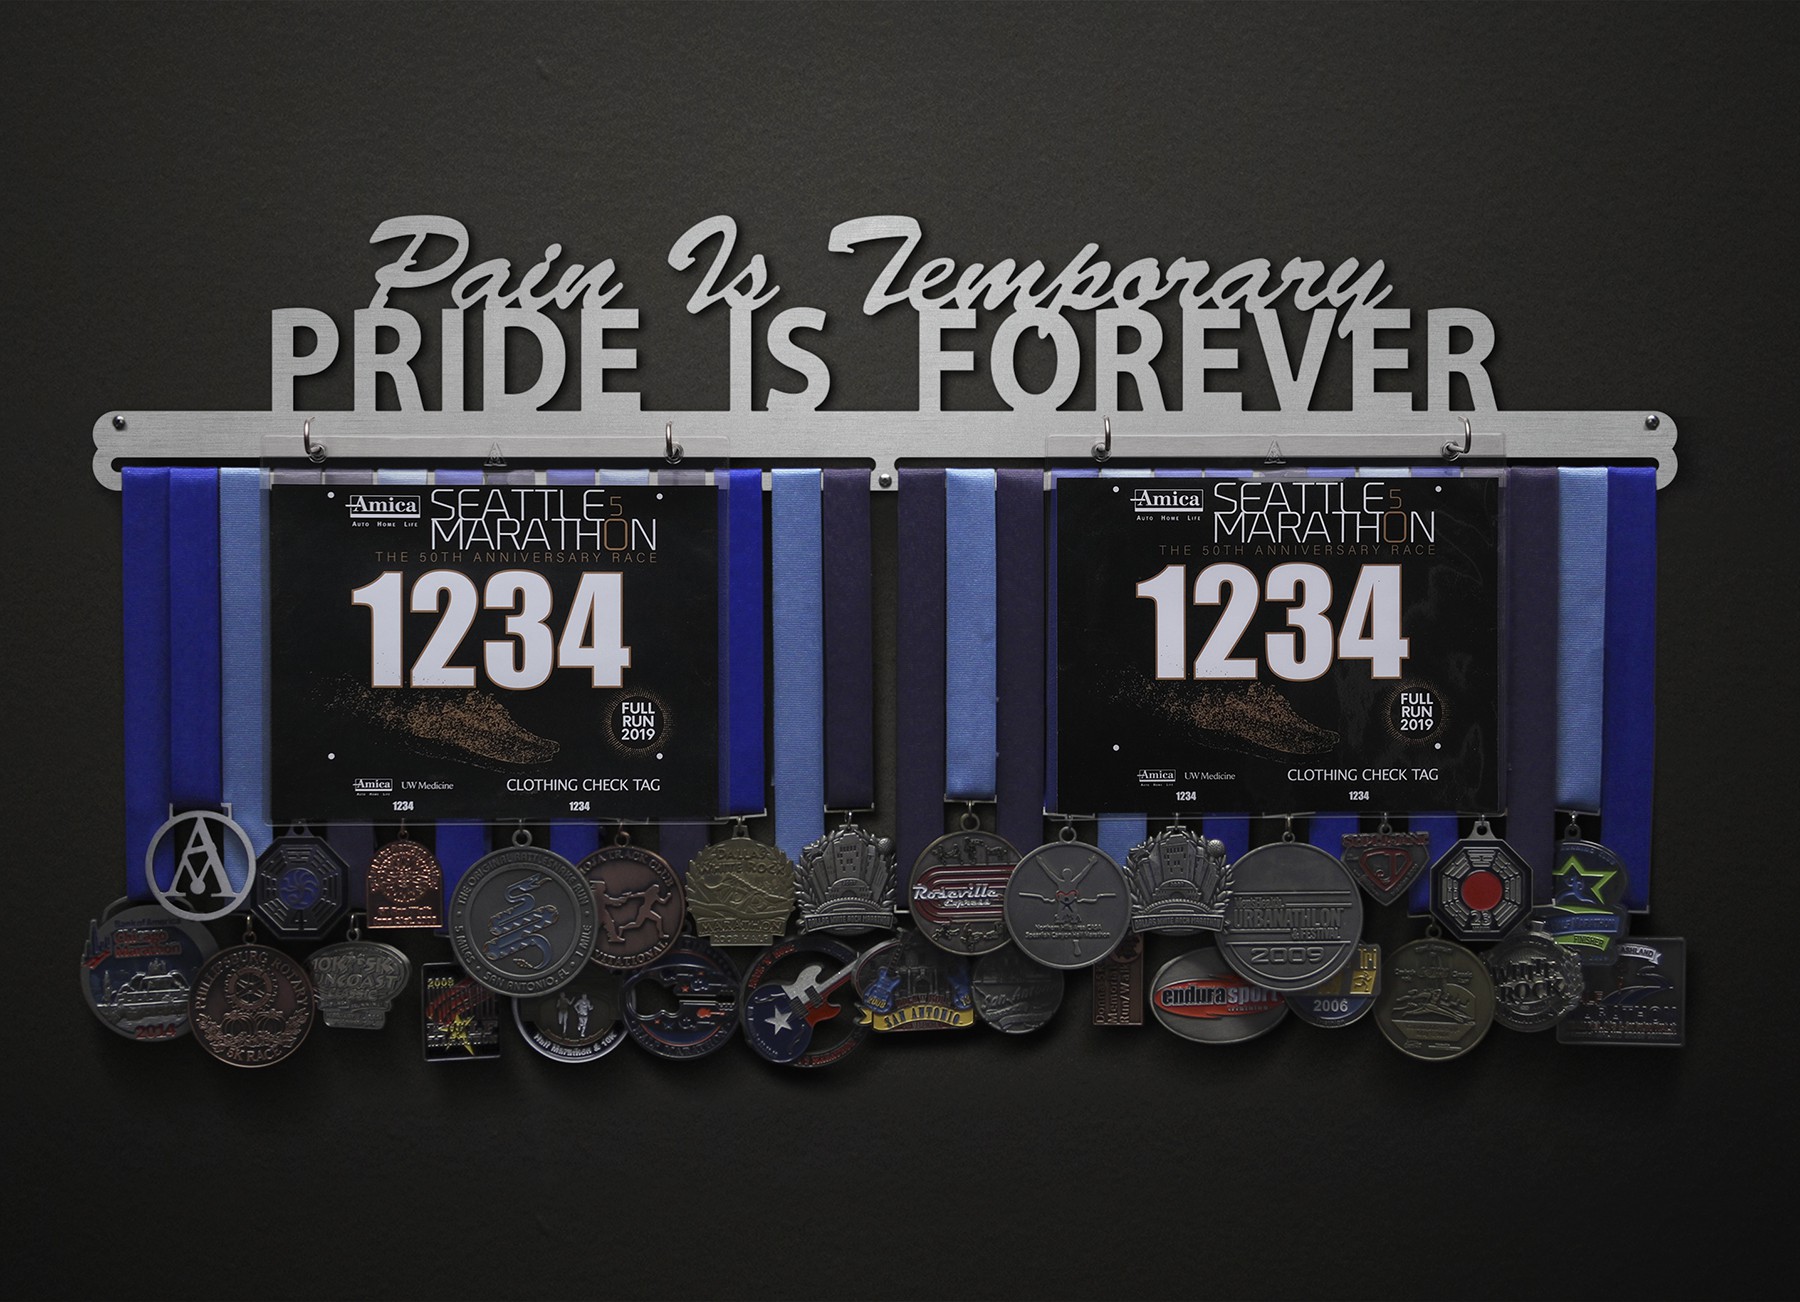 Pain Is Temporary, Pride Is Forever Bib and Medal Display